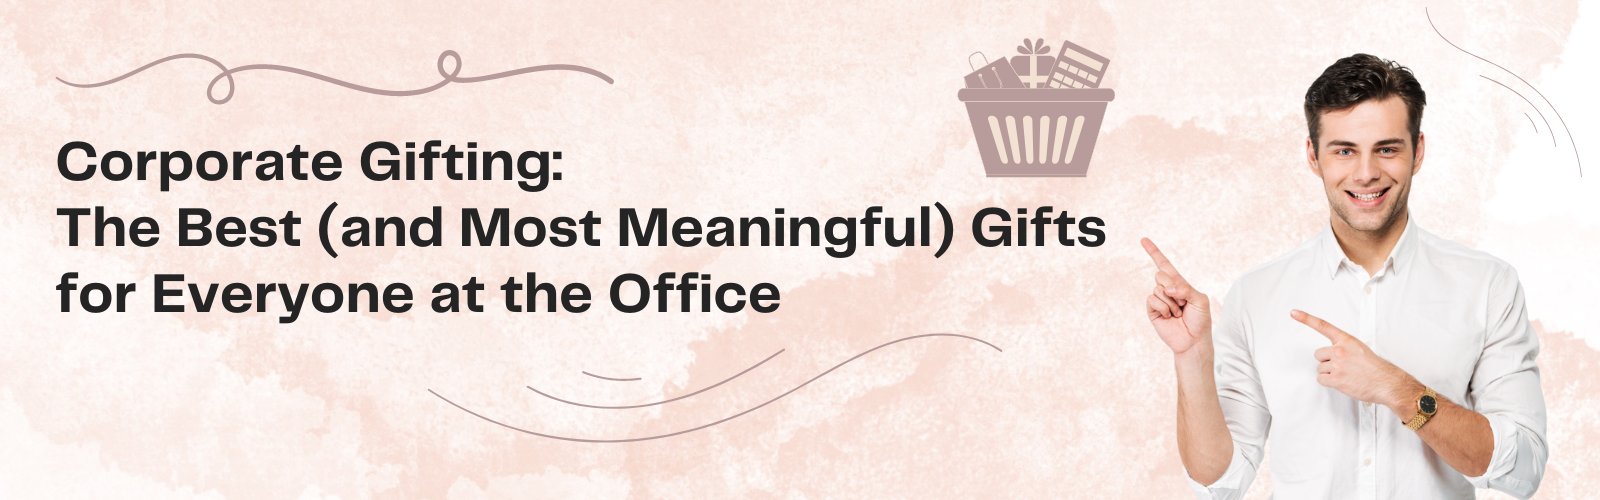 Corporate Gifting: The Best Gifts for Everyone at the Office Blog Annex Photo Toronto